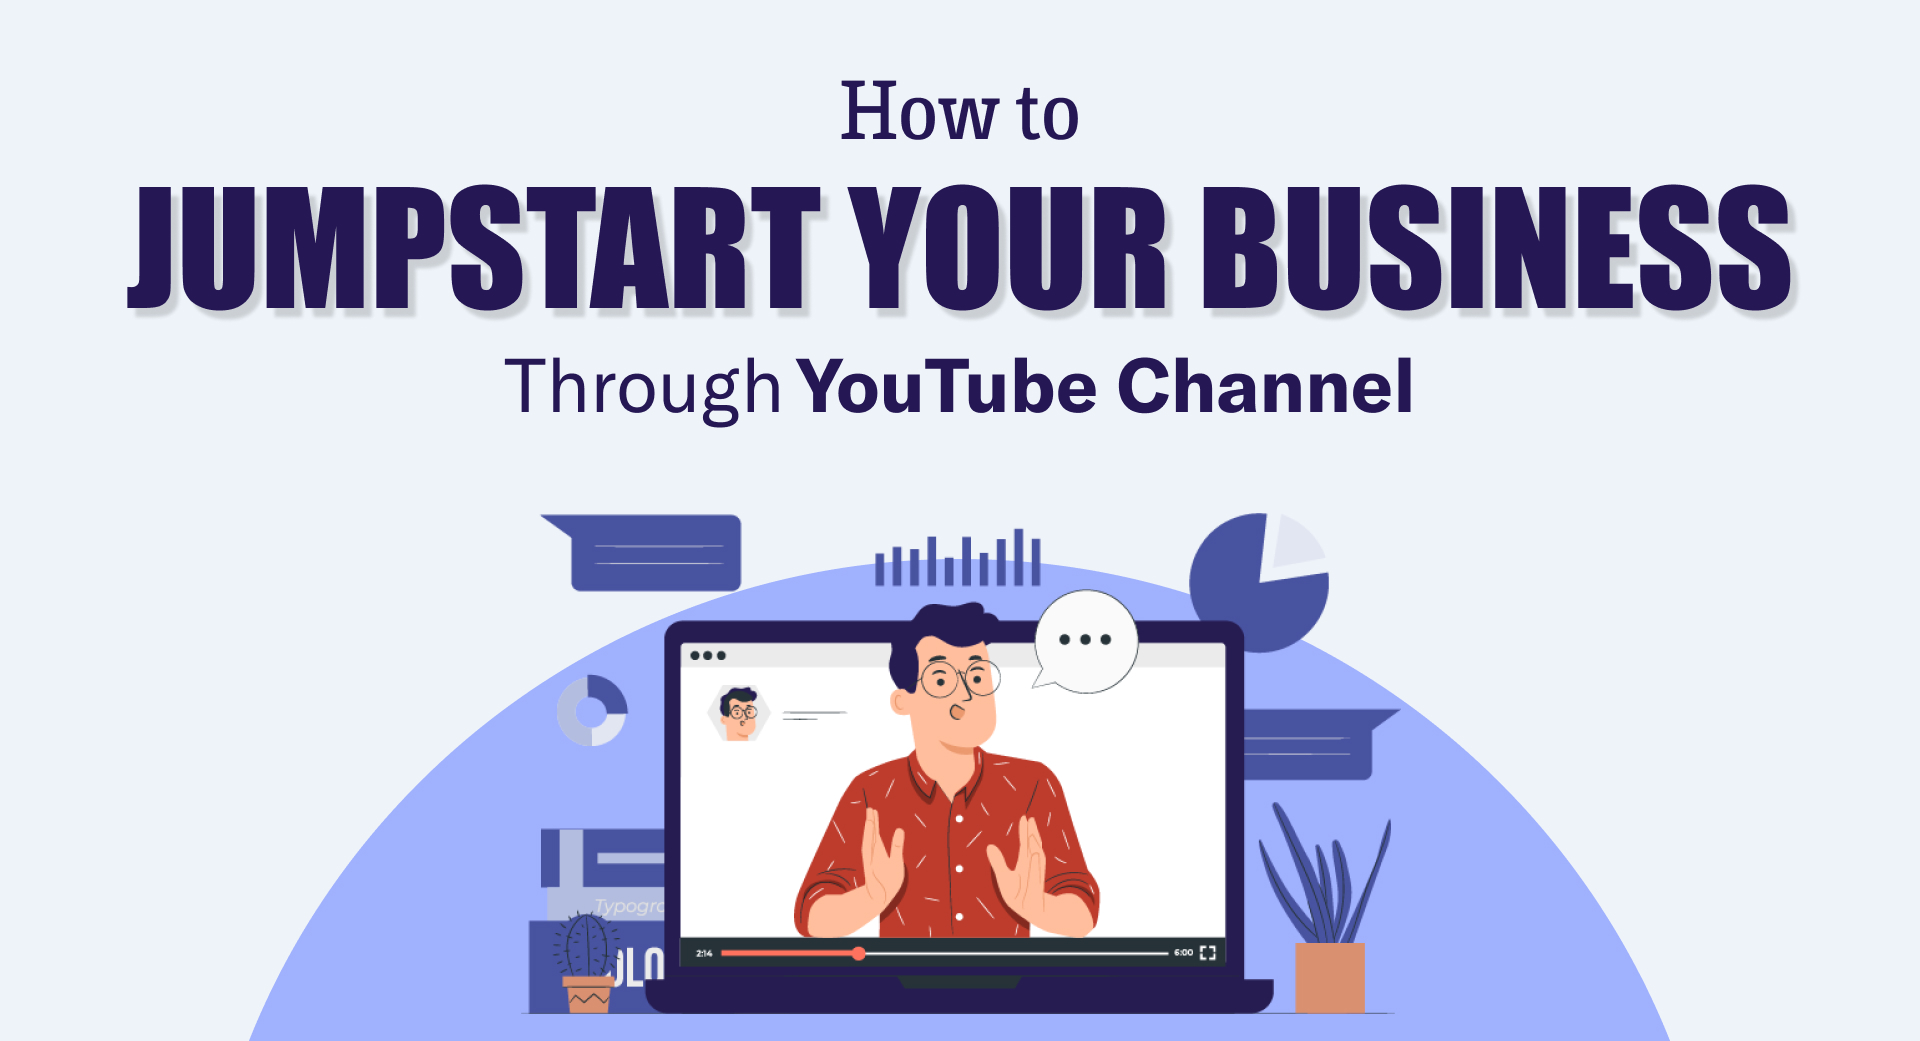 Jumpstart-Your-Business-Through-YouTube-Channel